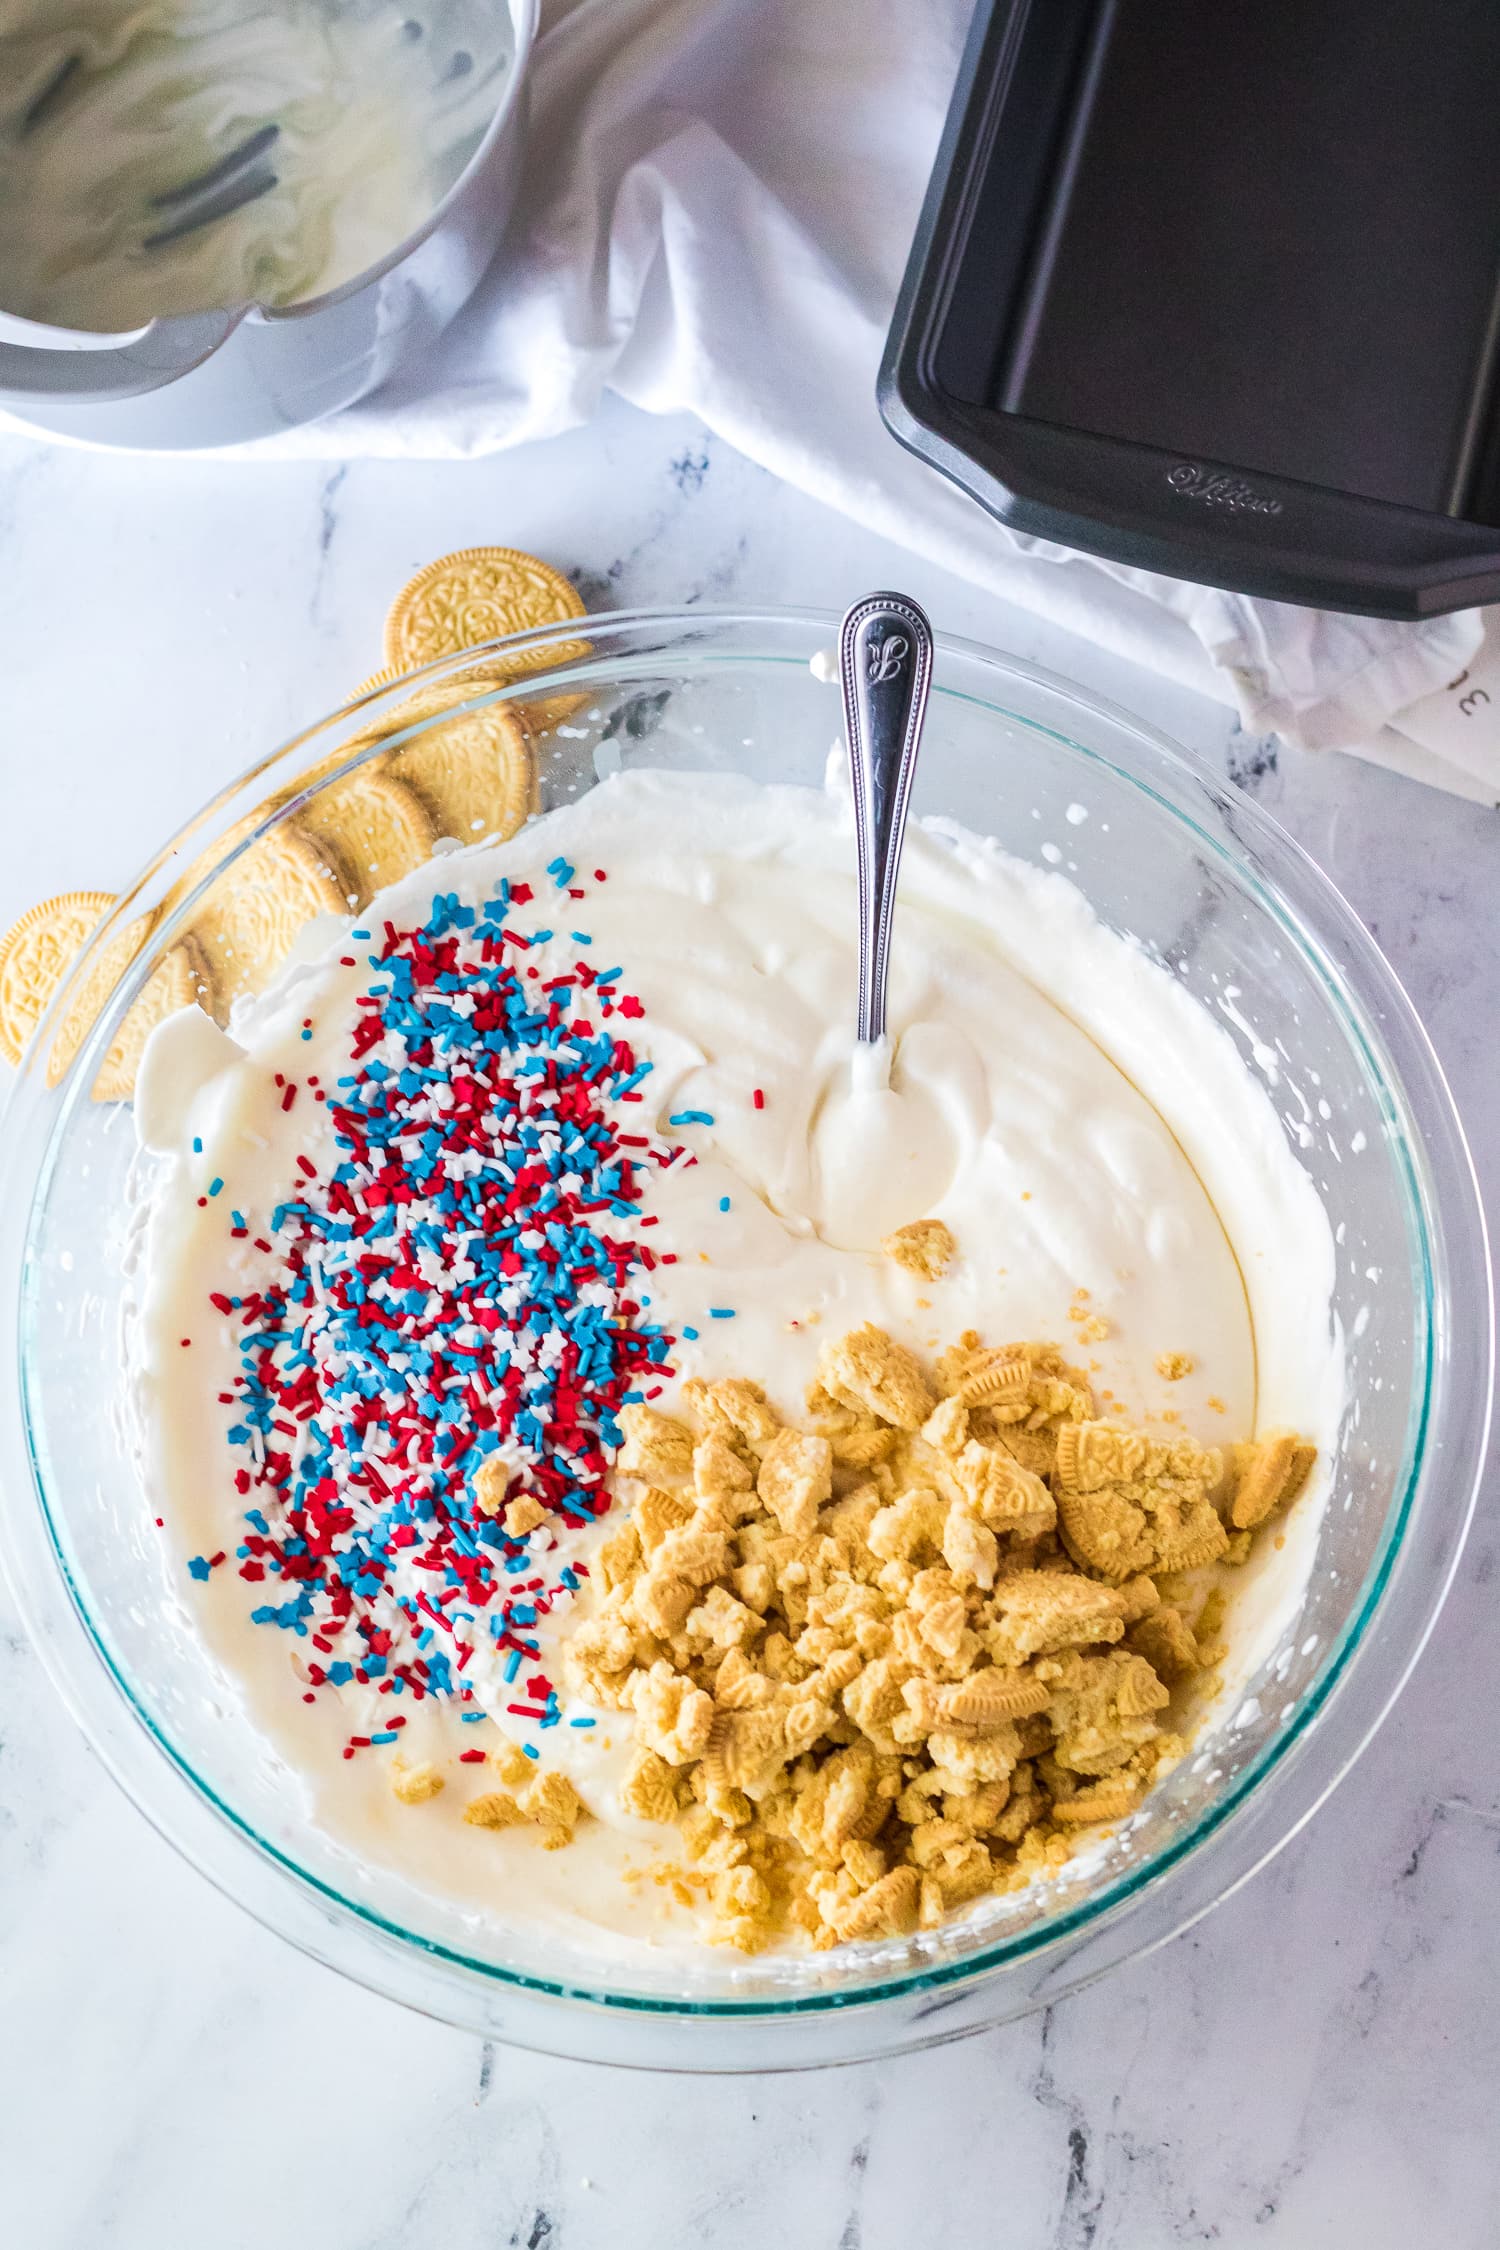 Ice cream base, sprinkles and crushed Golden Oreo Ice cream in bowl